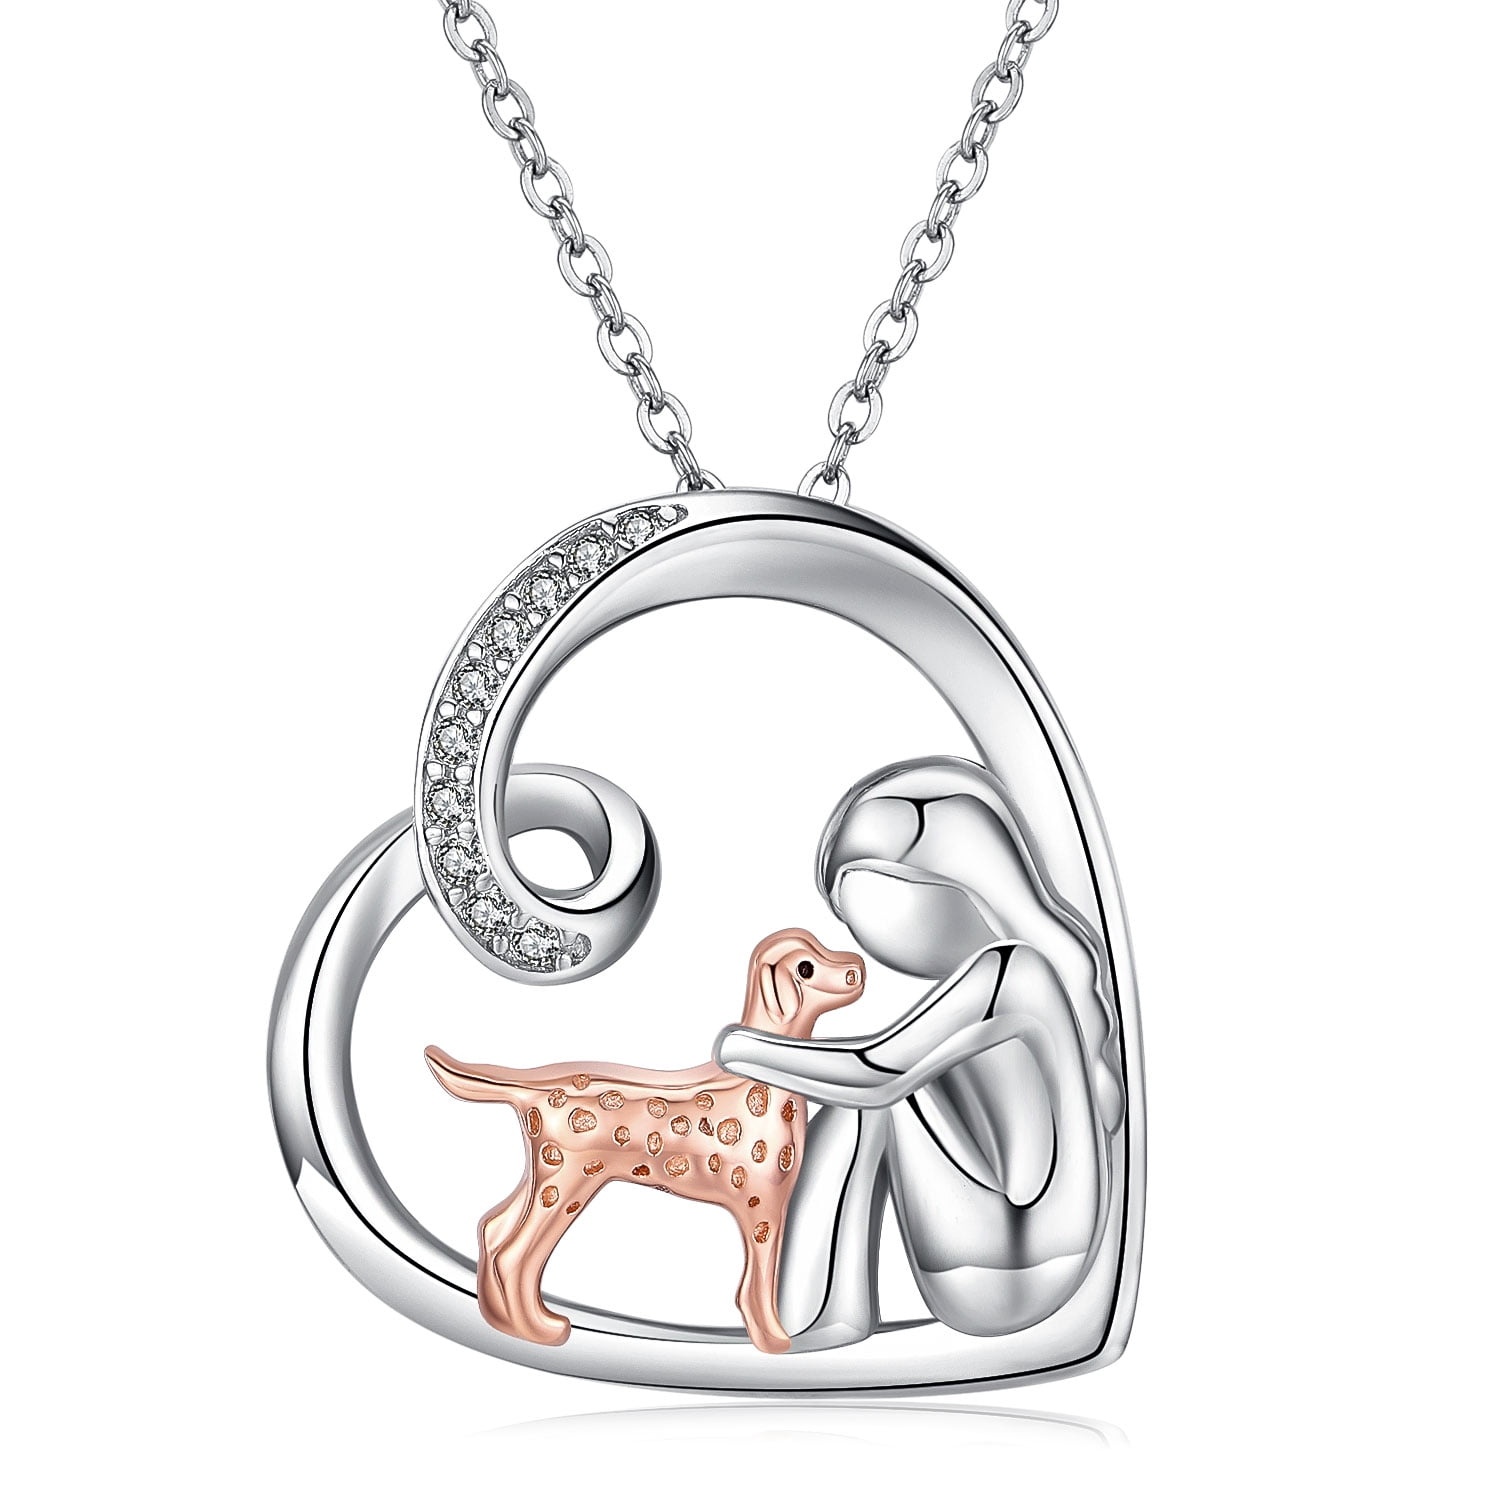 Lovely Cute Animal Shaped Pendant Gift Charming Sweet Women Jewelry Penguin Necklace 